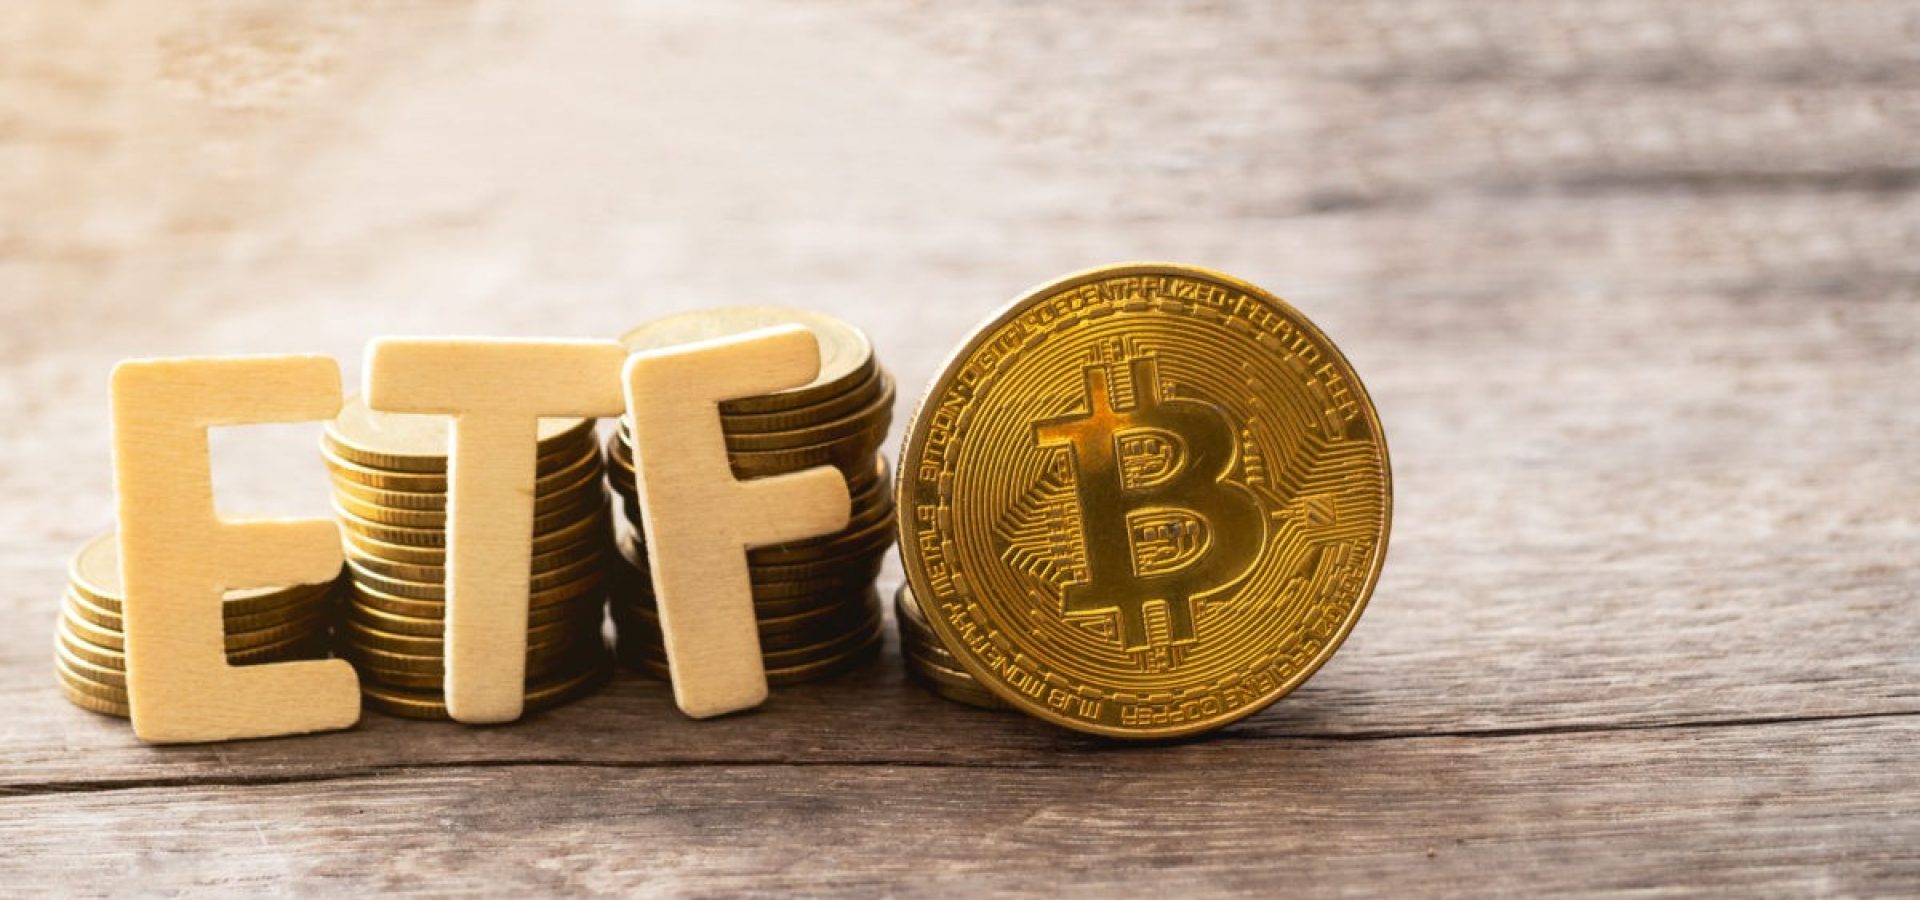 Market's sensation, Bitcoin's ETF: how can you invest?